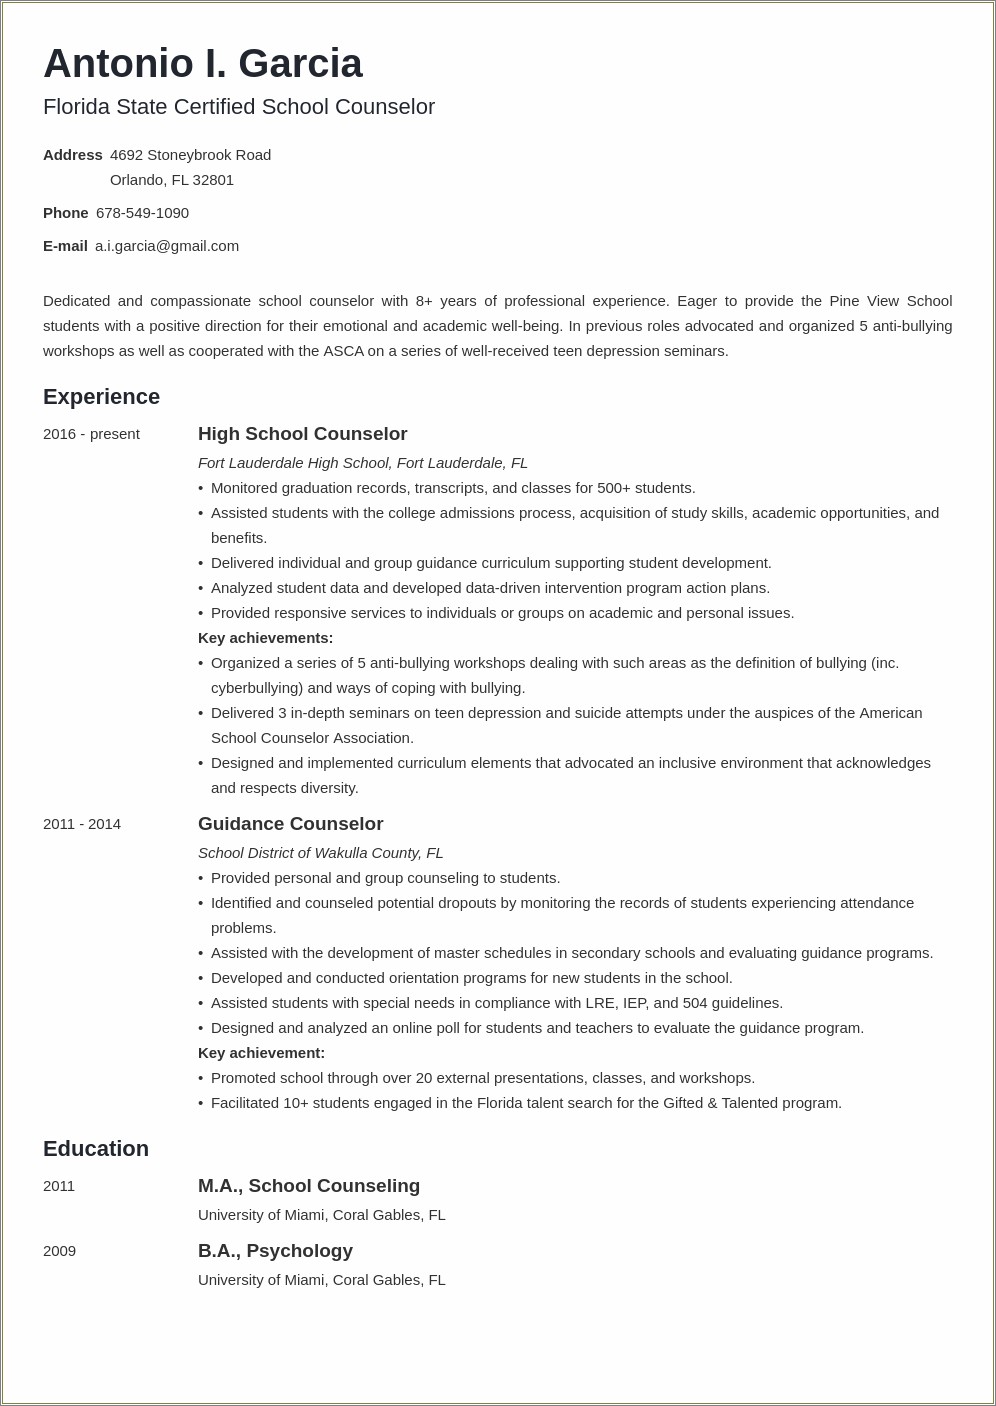 New School Counselor Resume Before License